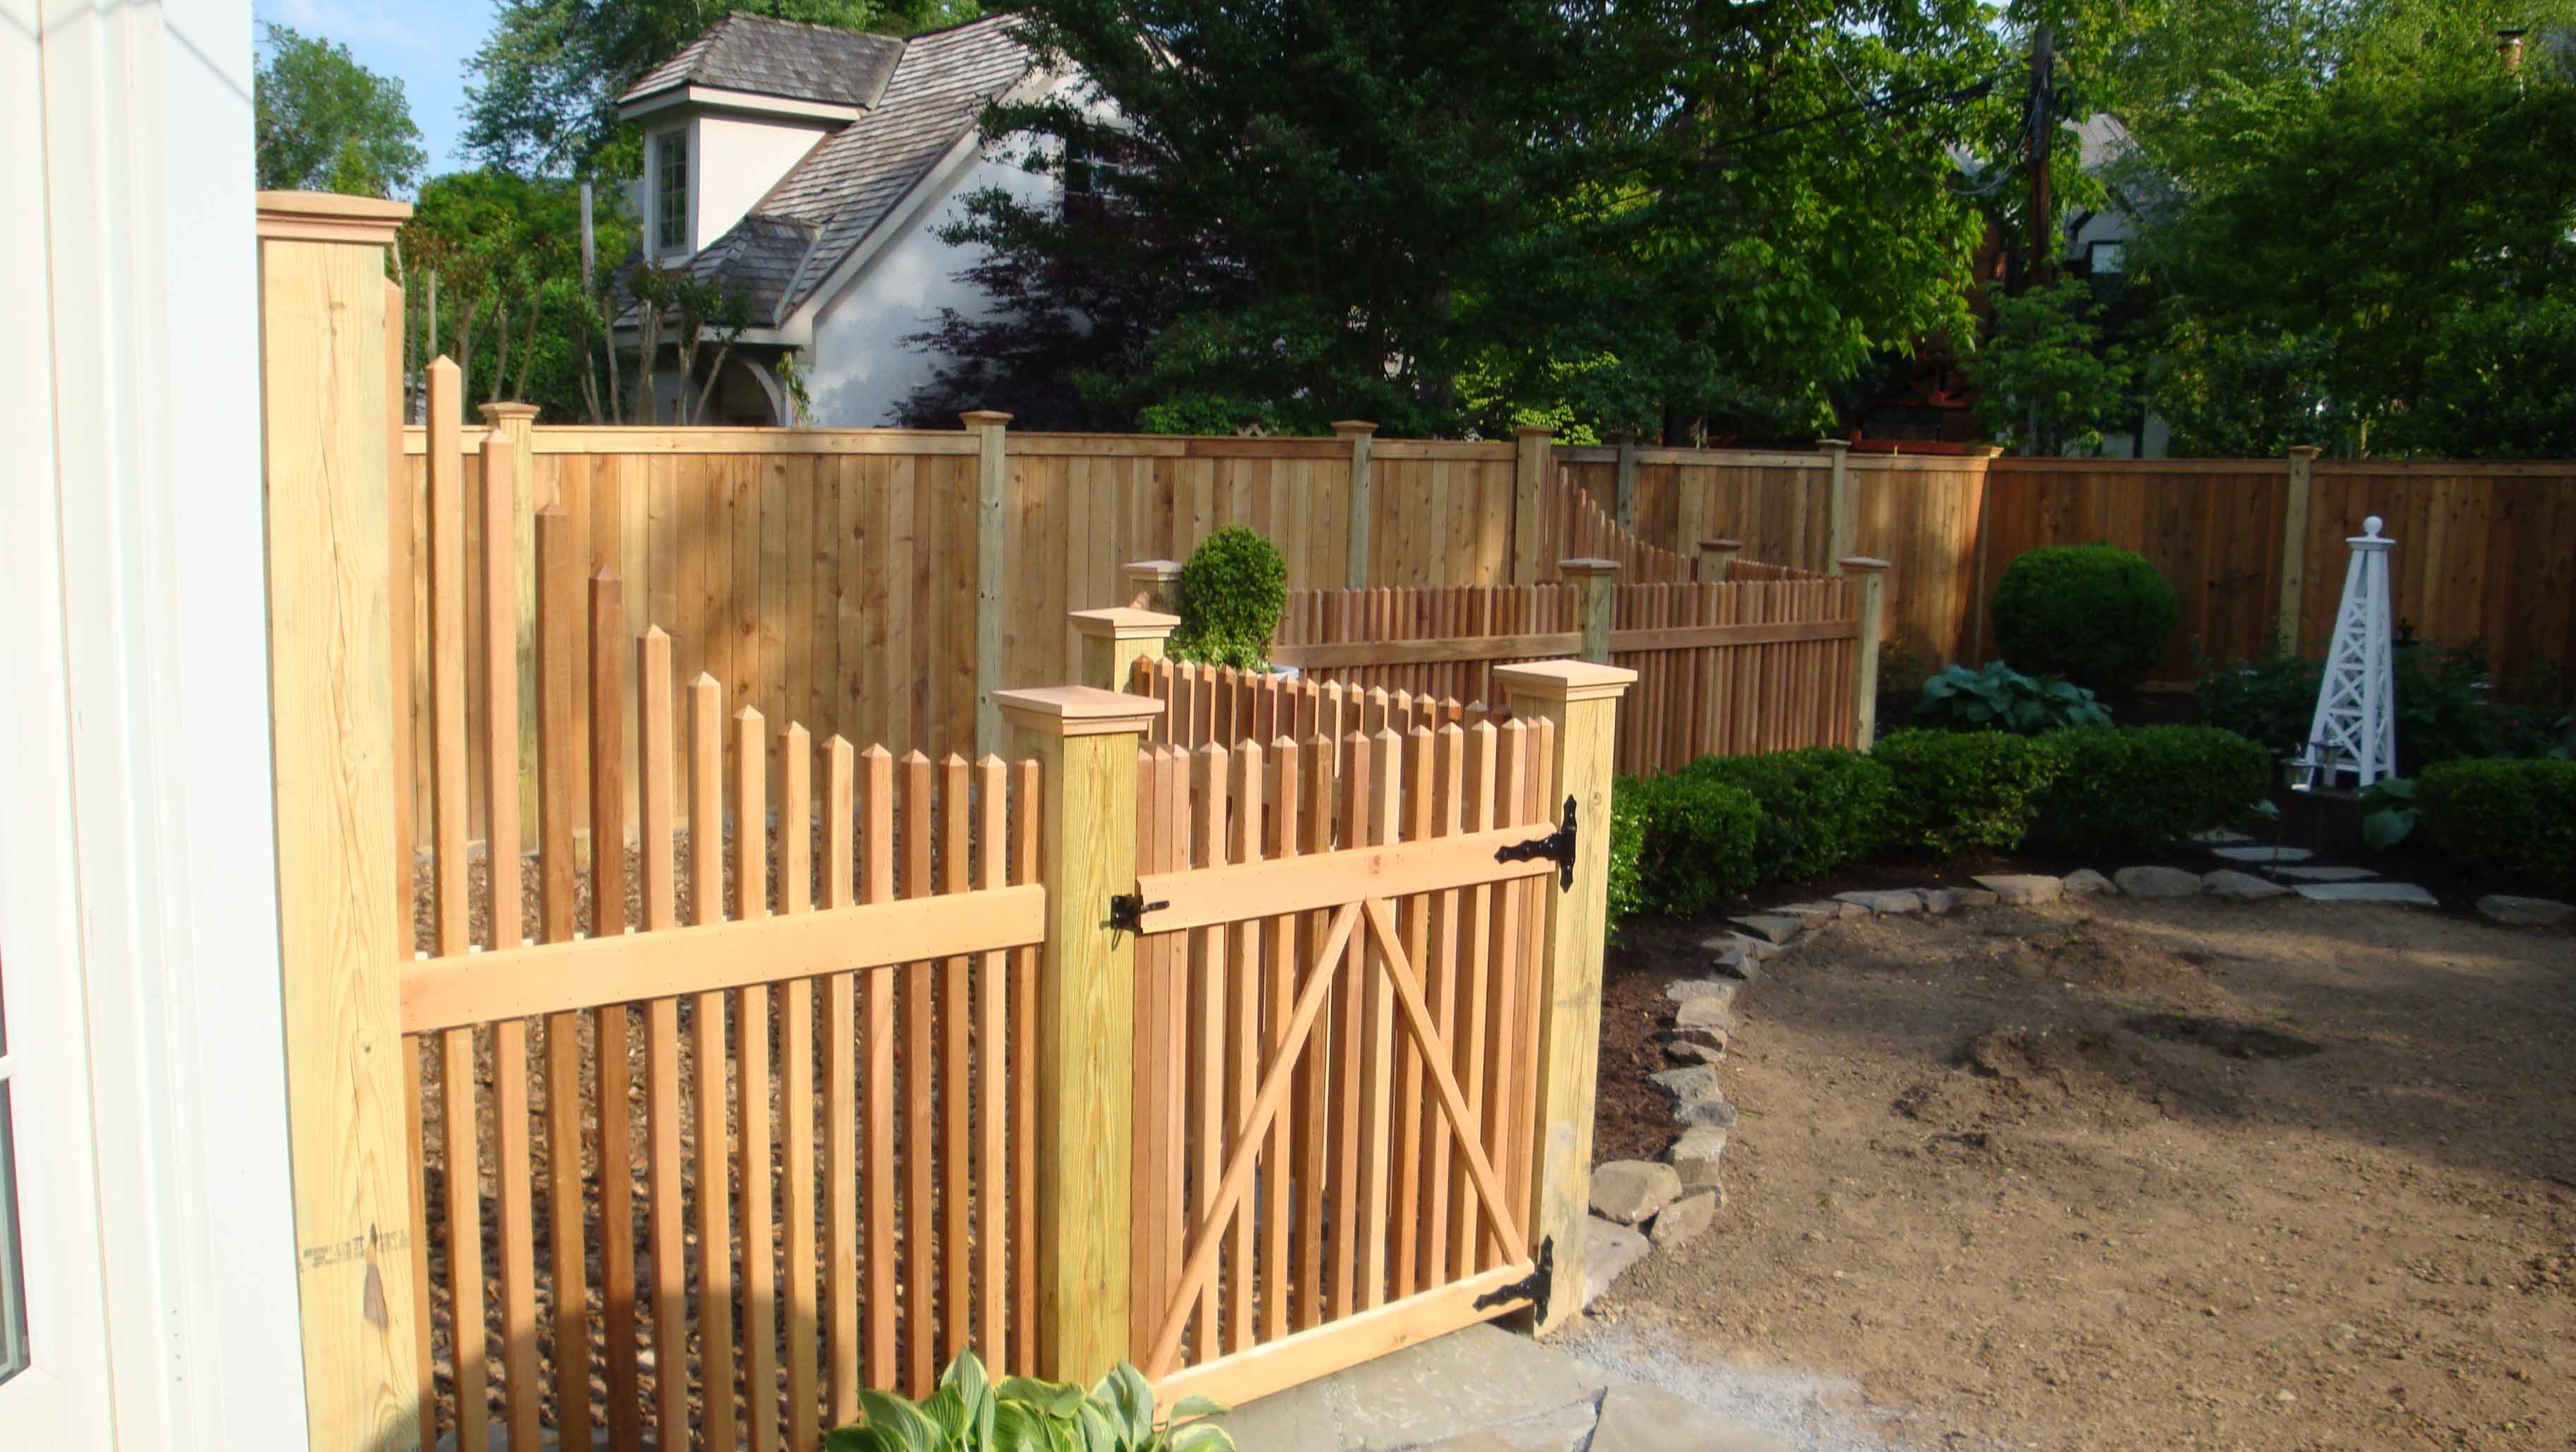 Cheap Fence Ideas For Dogs UK for Small Dogs